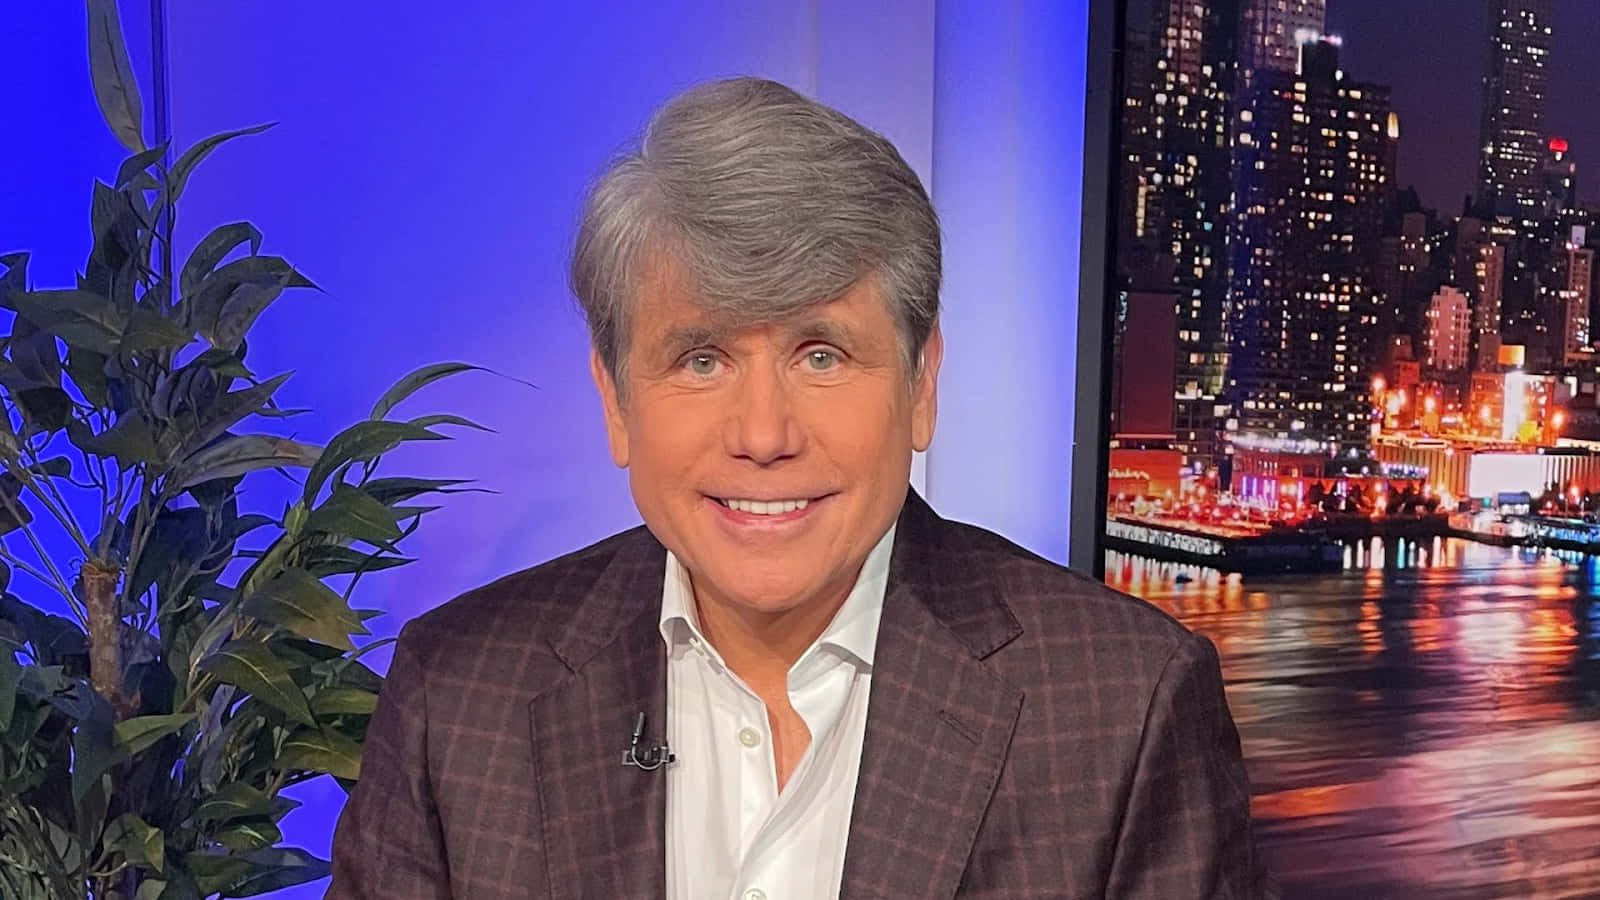 A charming portrait of Rod Blagojevich with an ear-to-ear smile. Wallpaper